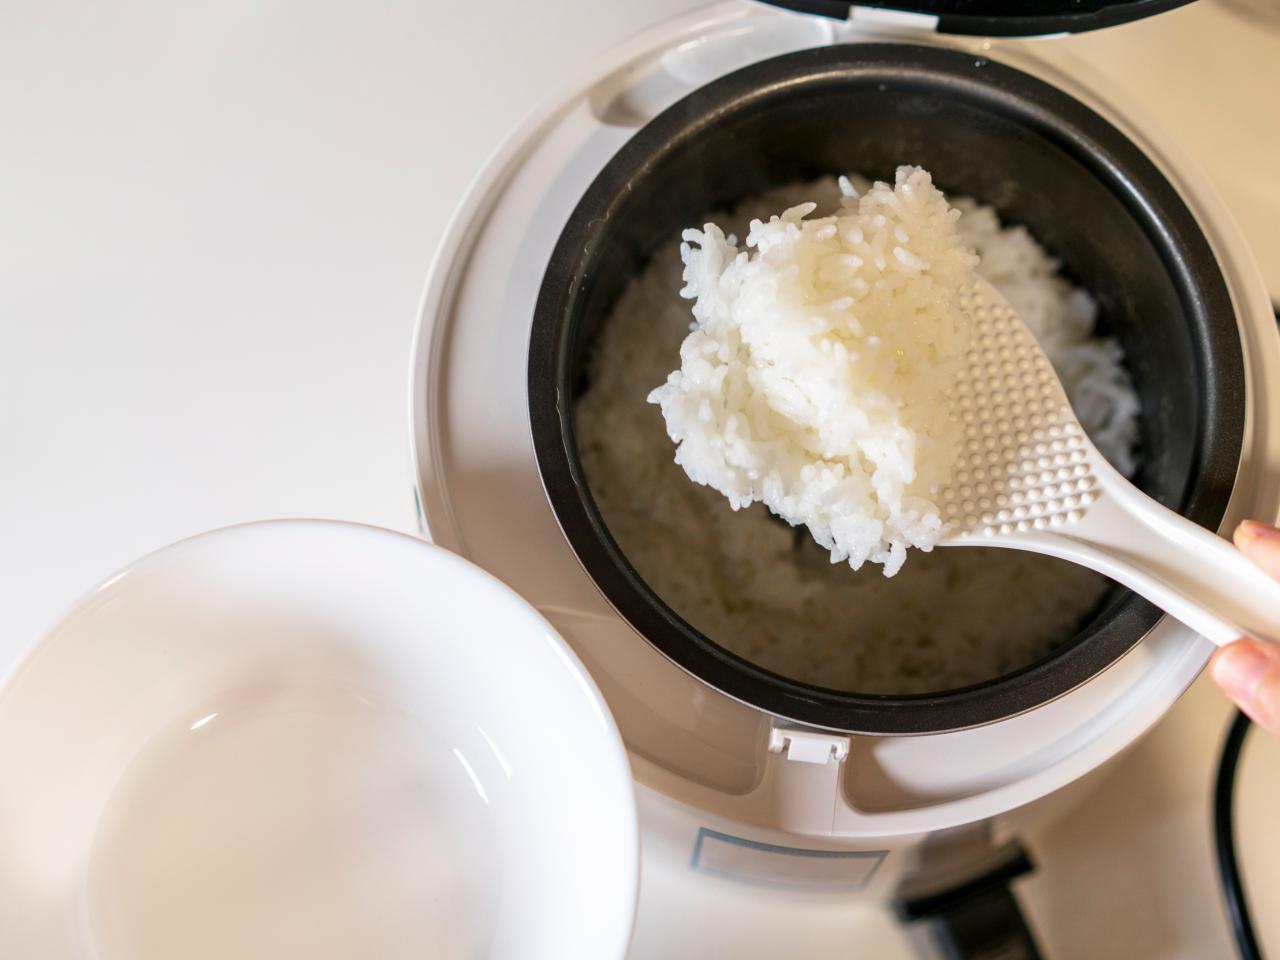 Cuisinart rice cooker. News Photo - Getty Images